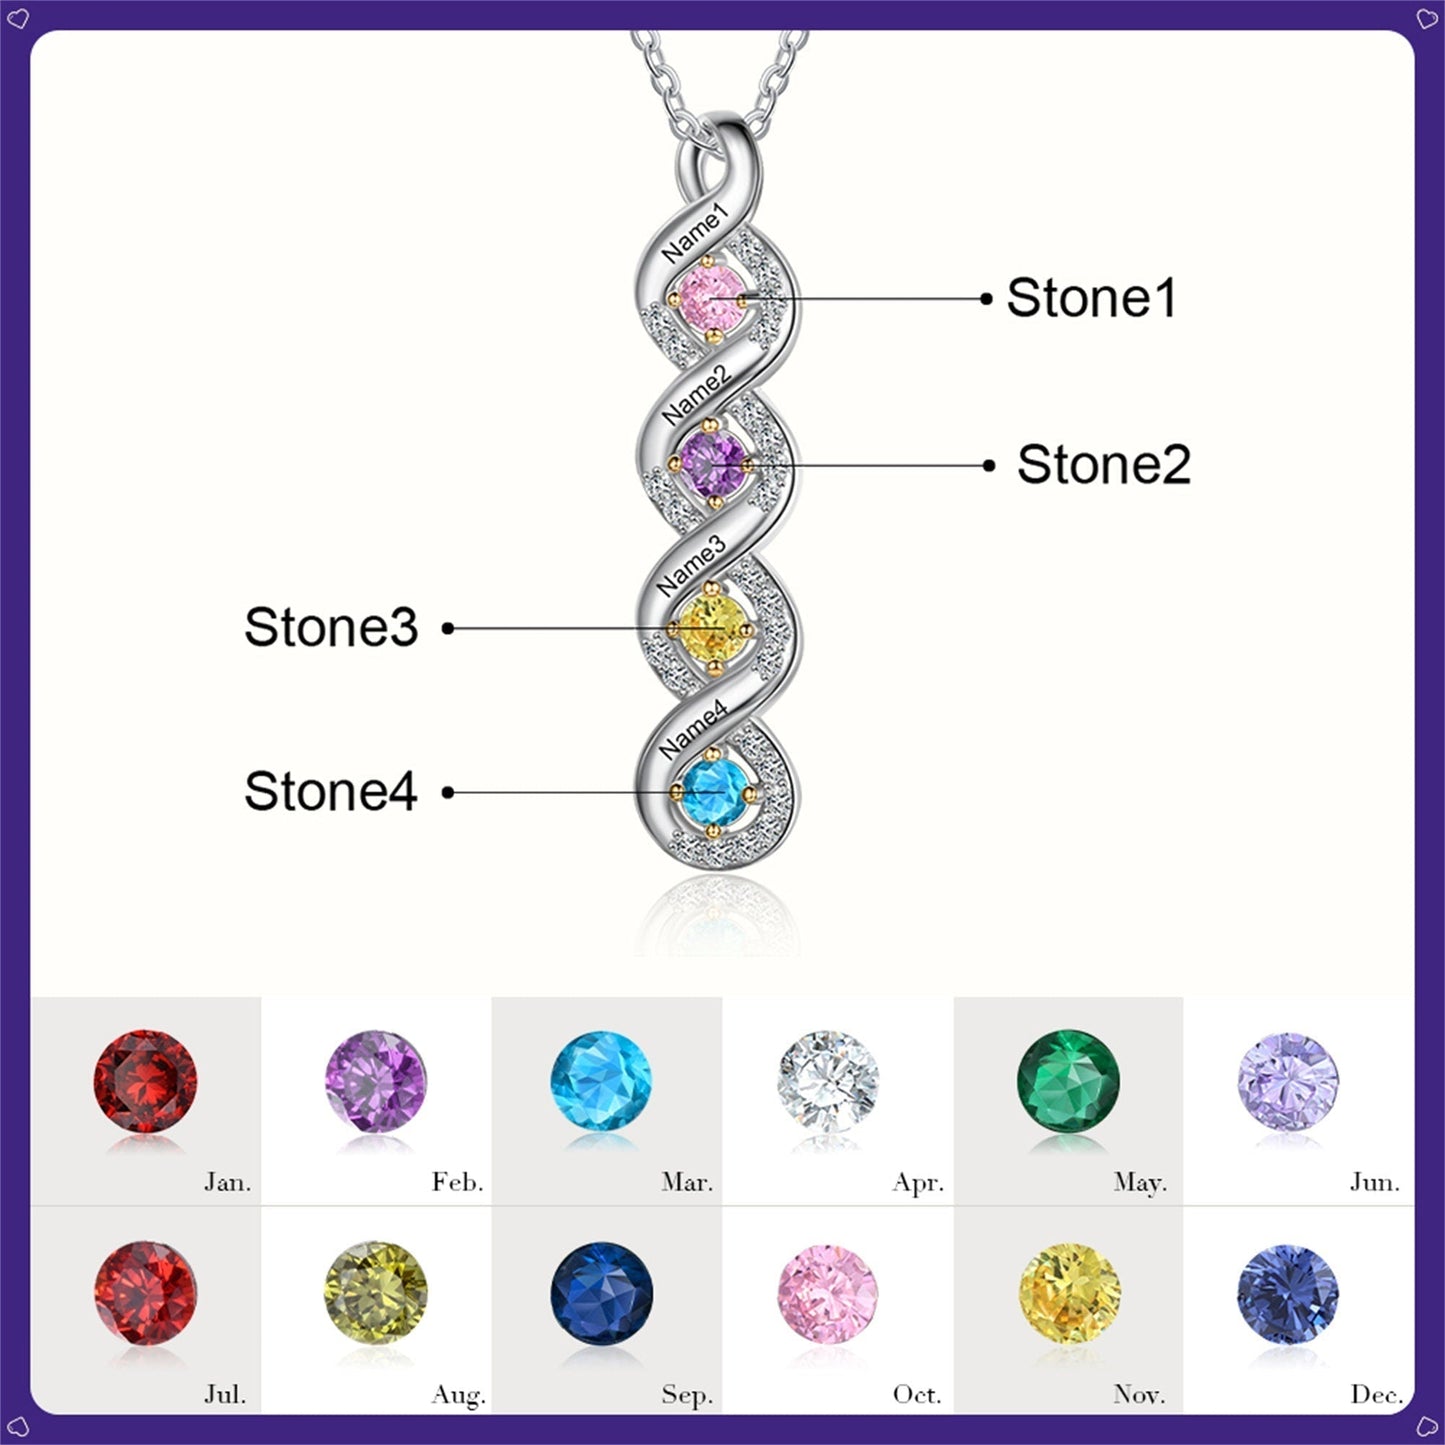 💕Personalized Mothers Rings Necklace with Birthstones